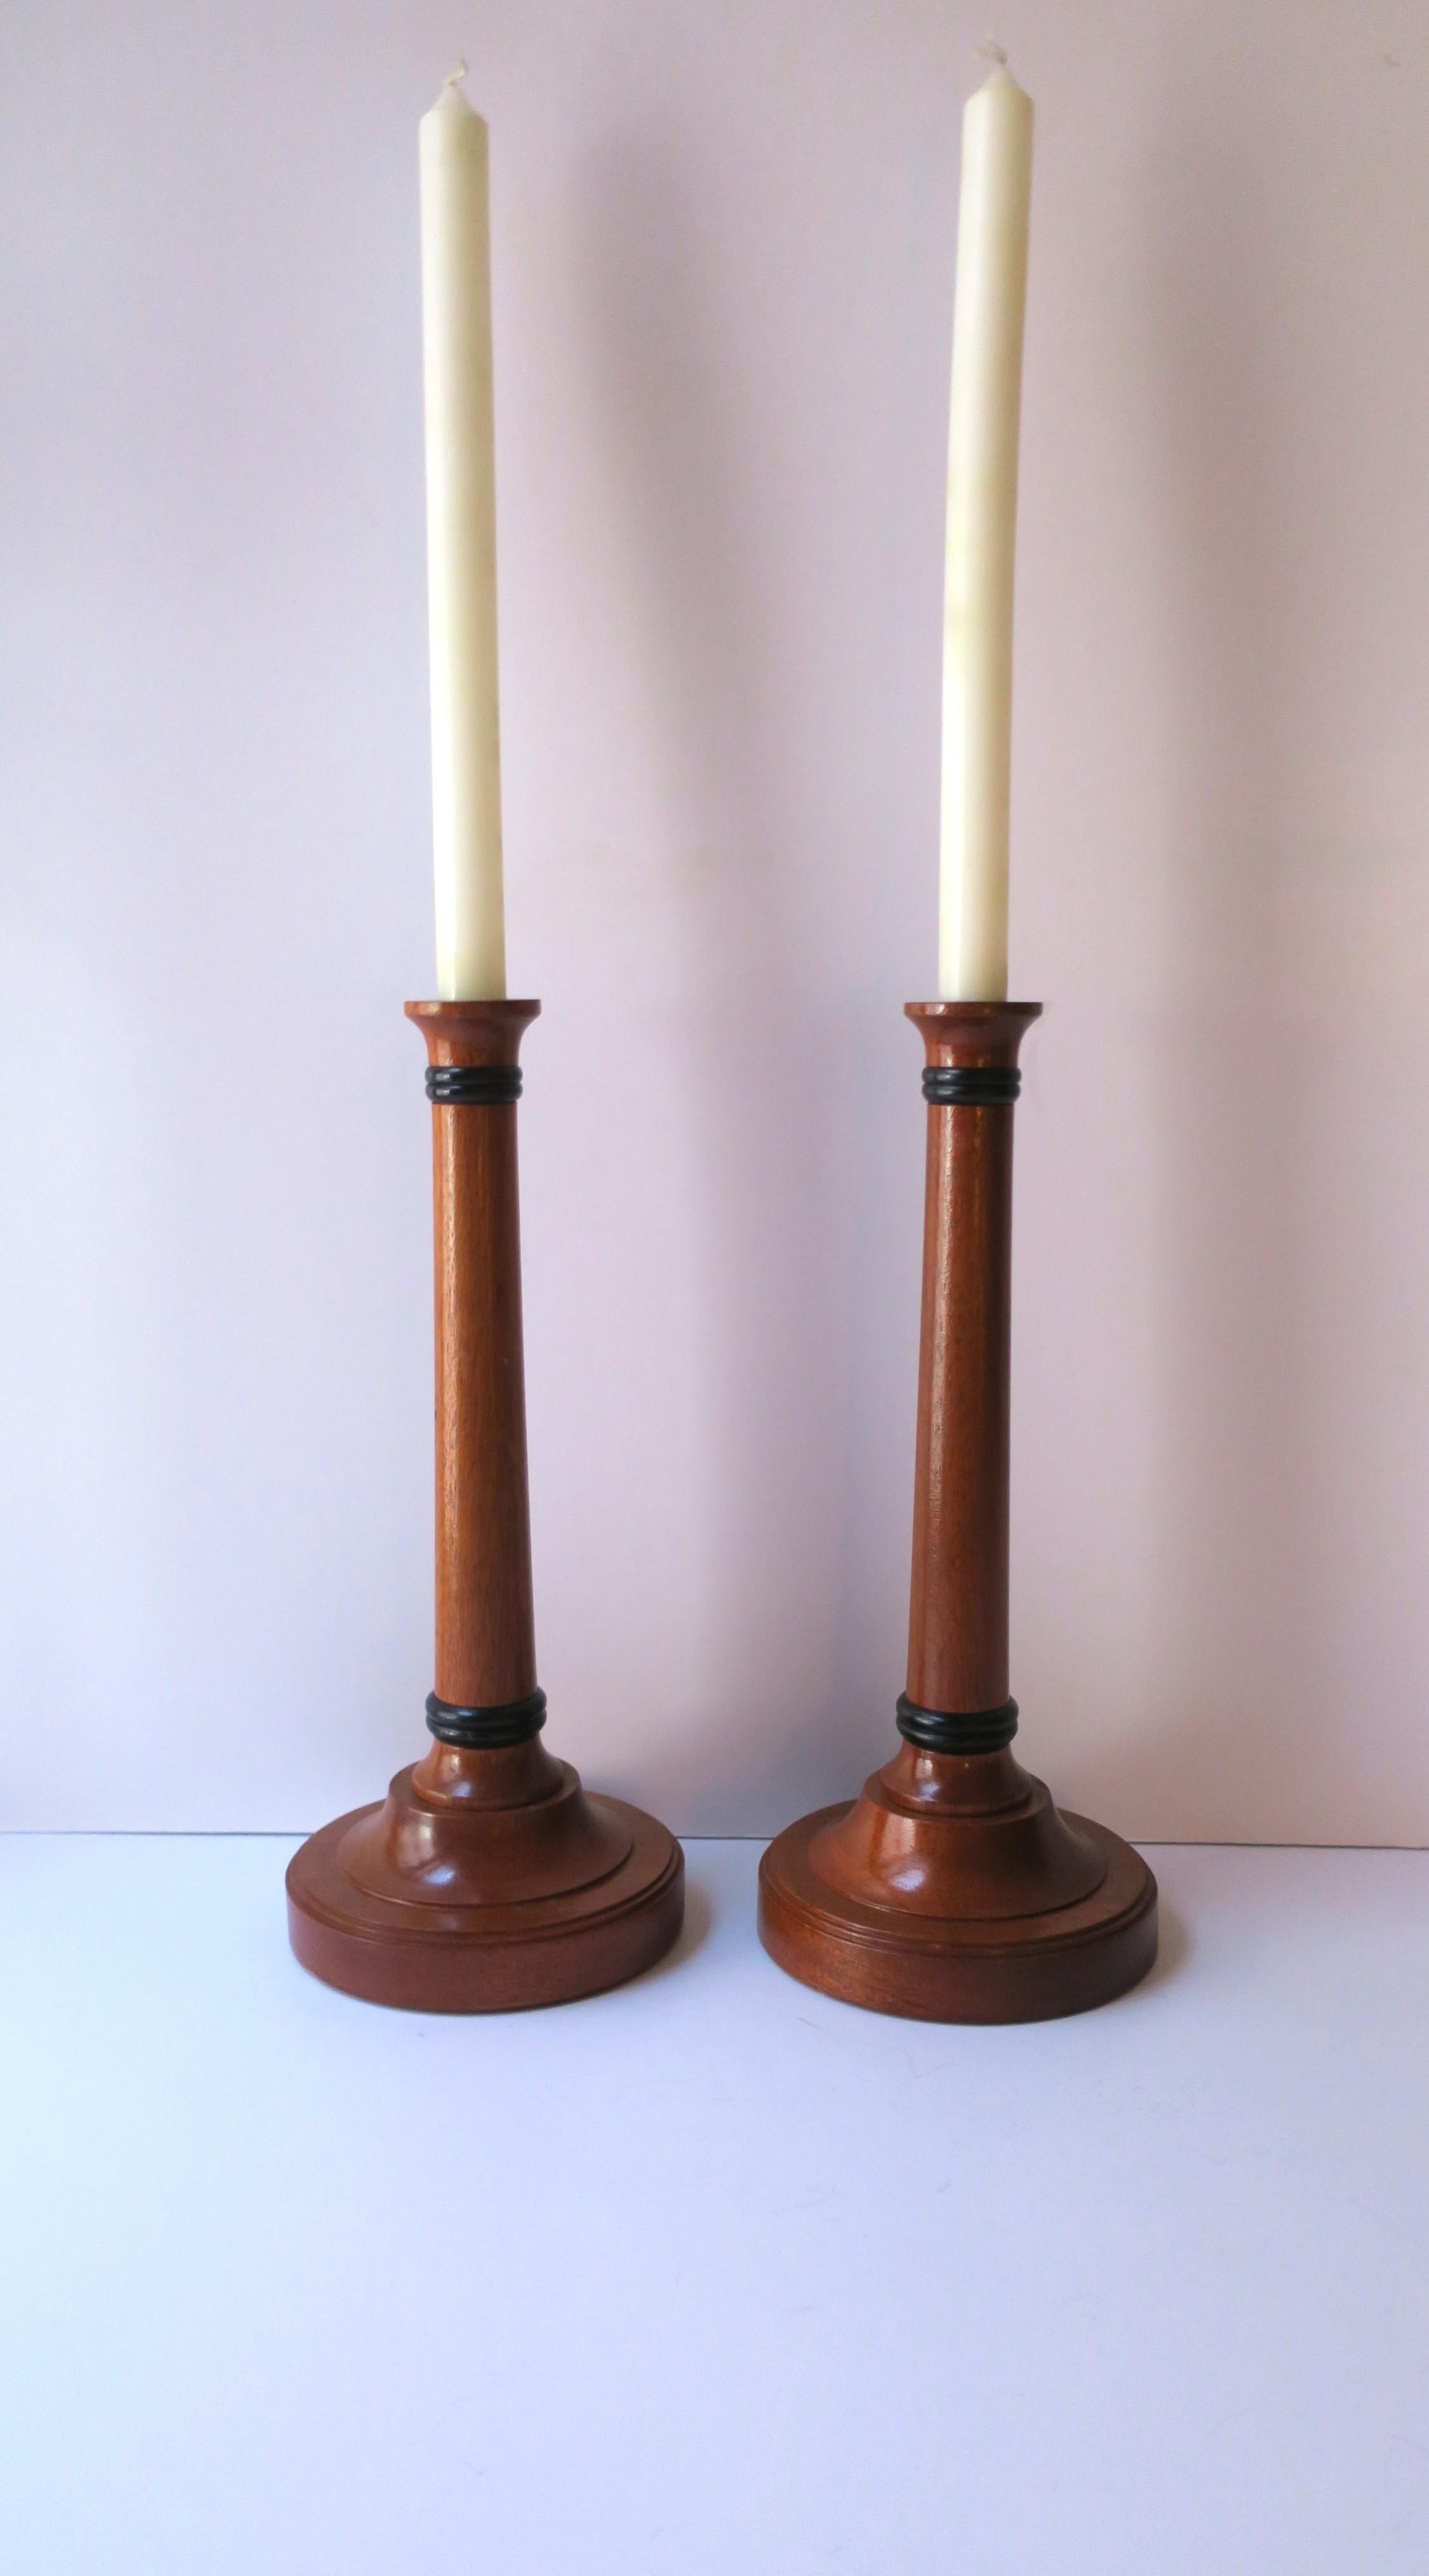 A pair of English hand-made wood candlesticks holders in a rich brown hue with black detail at top and bottom, circa late-20th century, England. Pair appears to have never been use. A great set for a dining table, fireplace mantel, etc. Marked 'hand